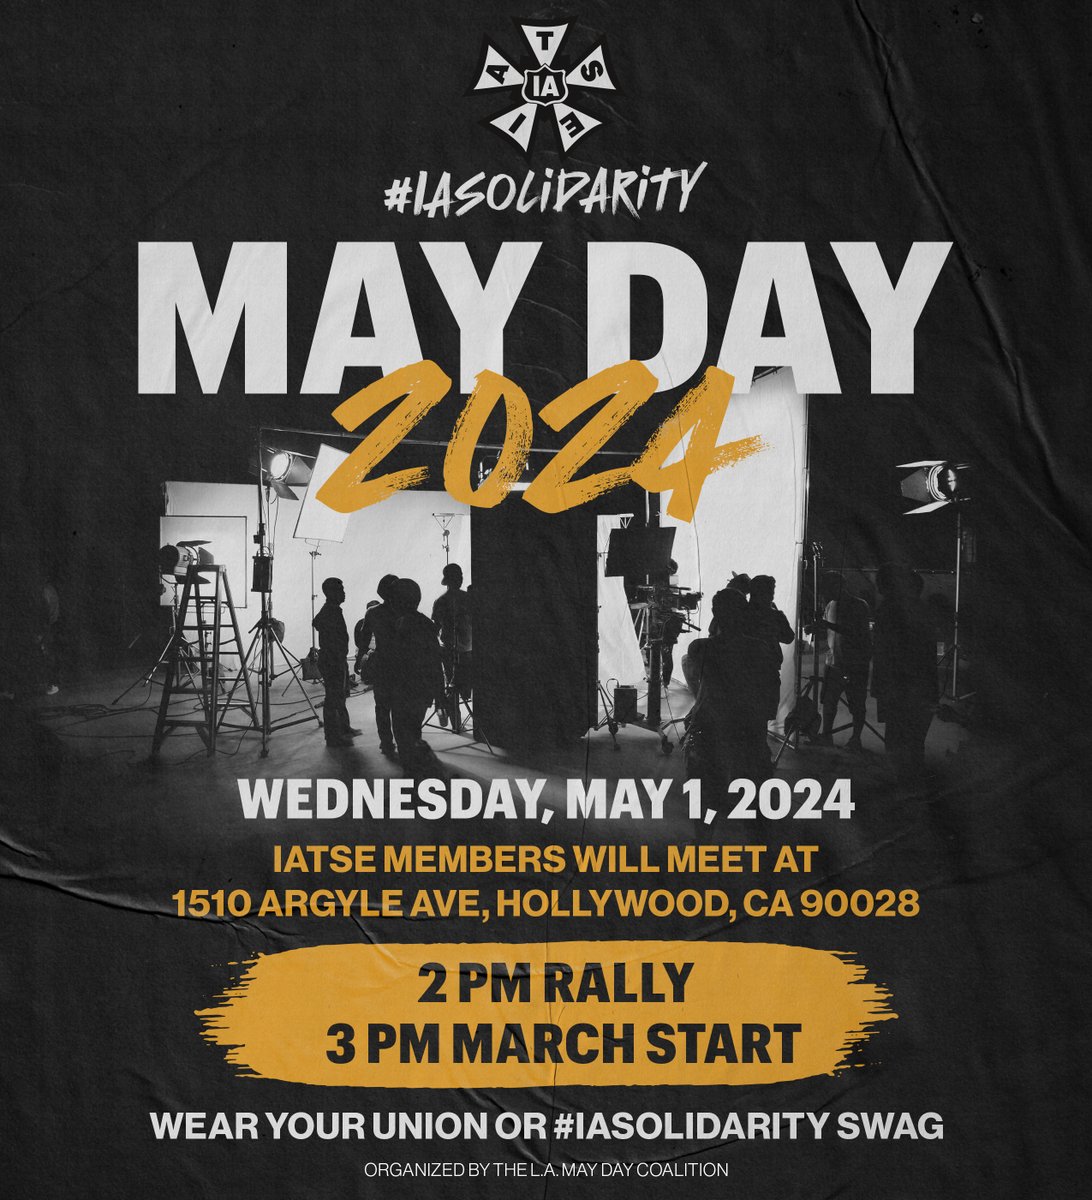 Wednesday, May 1, is May Day, a day to celebrate the strength of the Labor Movement. Local 600 + @IATSE members are welcome to participate in the many events taking place across the country: bit.ly/3WgNzDB

#UnionStrong #StrongerTogether #IASolidarity